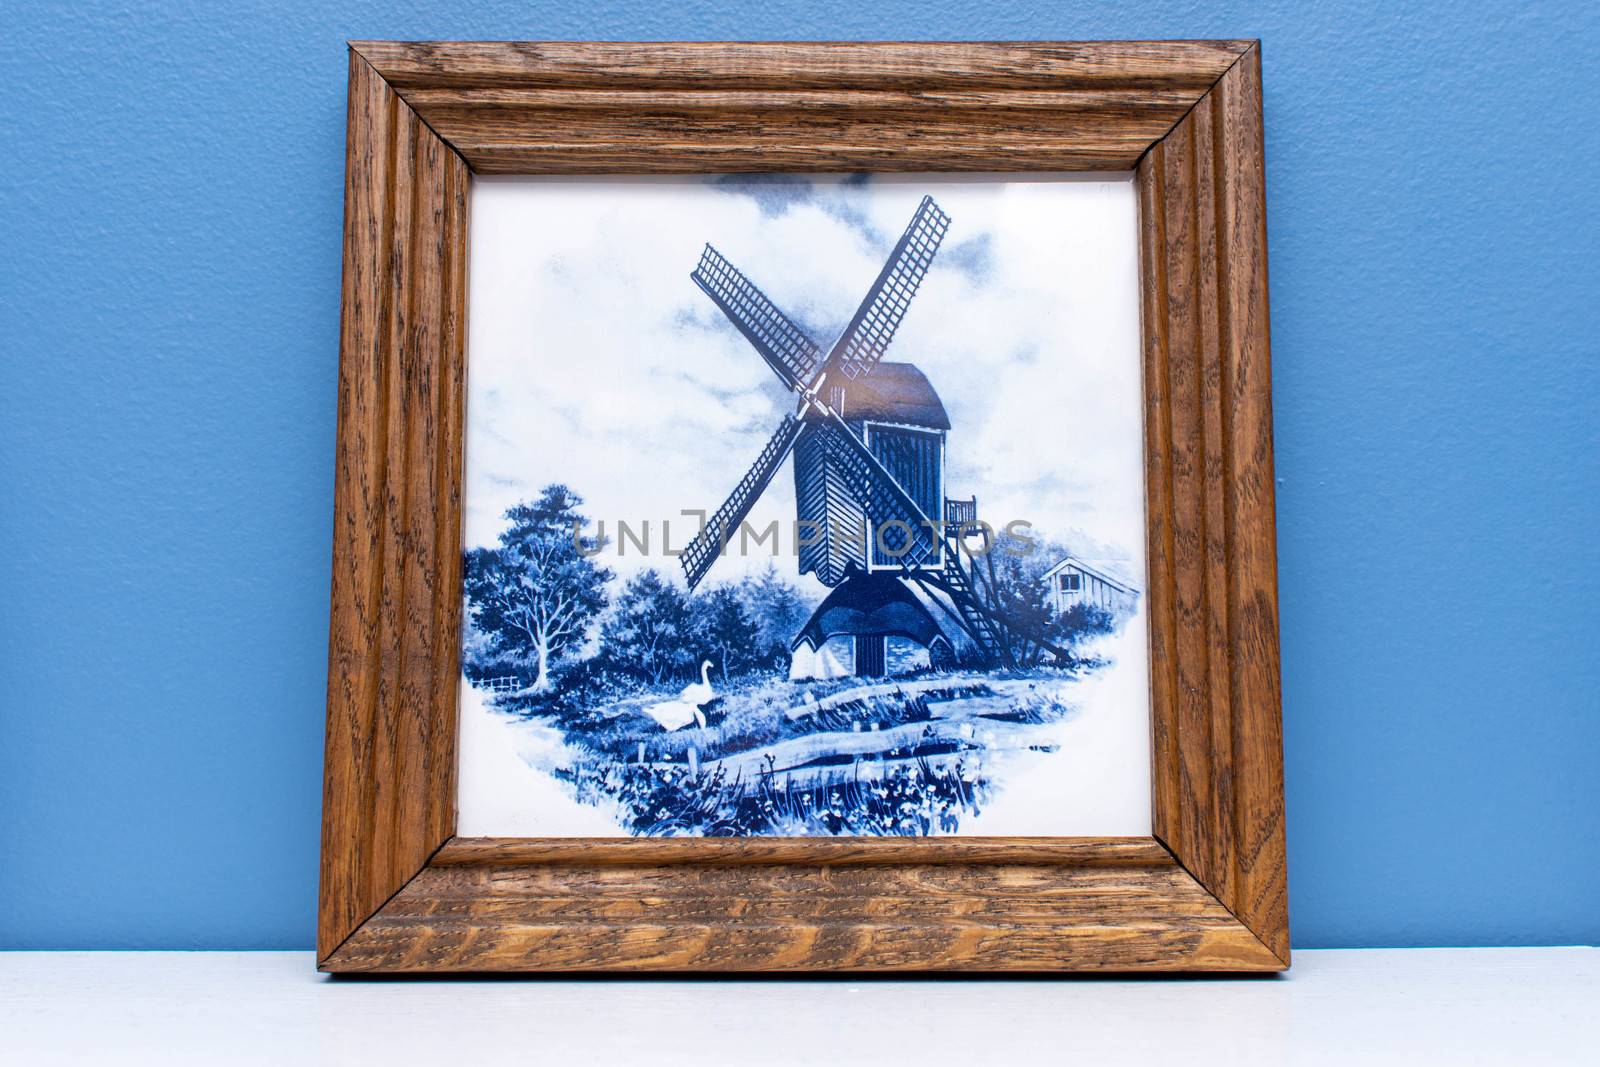 Delft Blue tile in a frame, a souvenir from Holland/Netherlands. by kingmaphotos